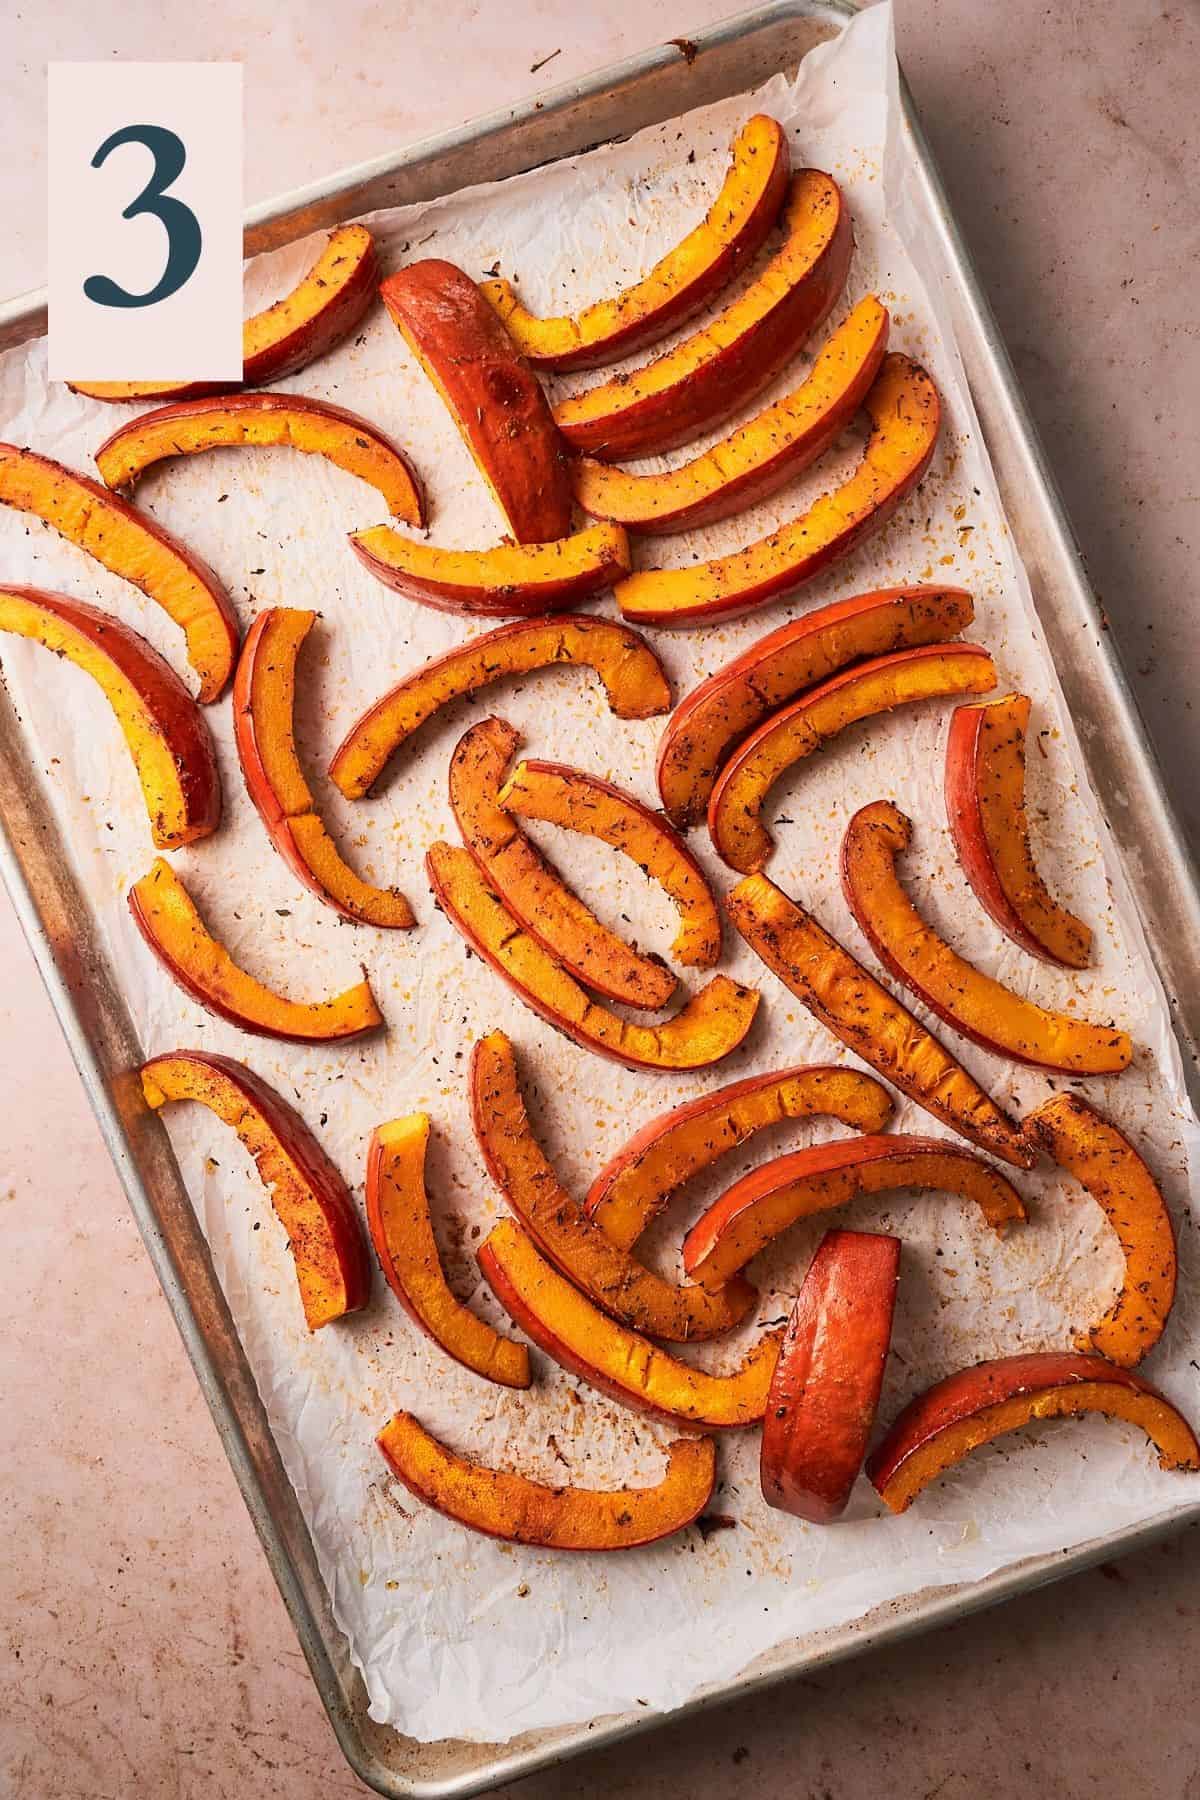 Pumpkin wedges baked at 425°F degrees and fully cooked on a parchment lined baking sheet.